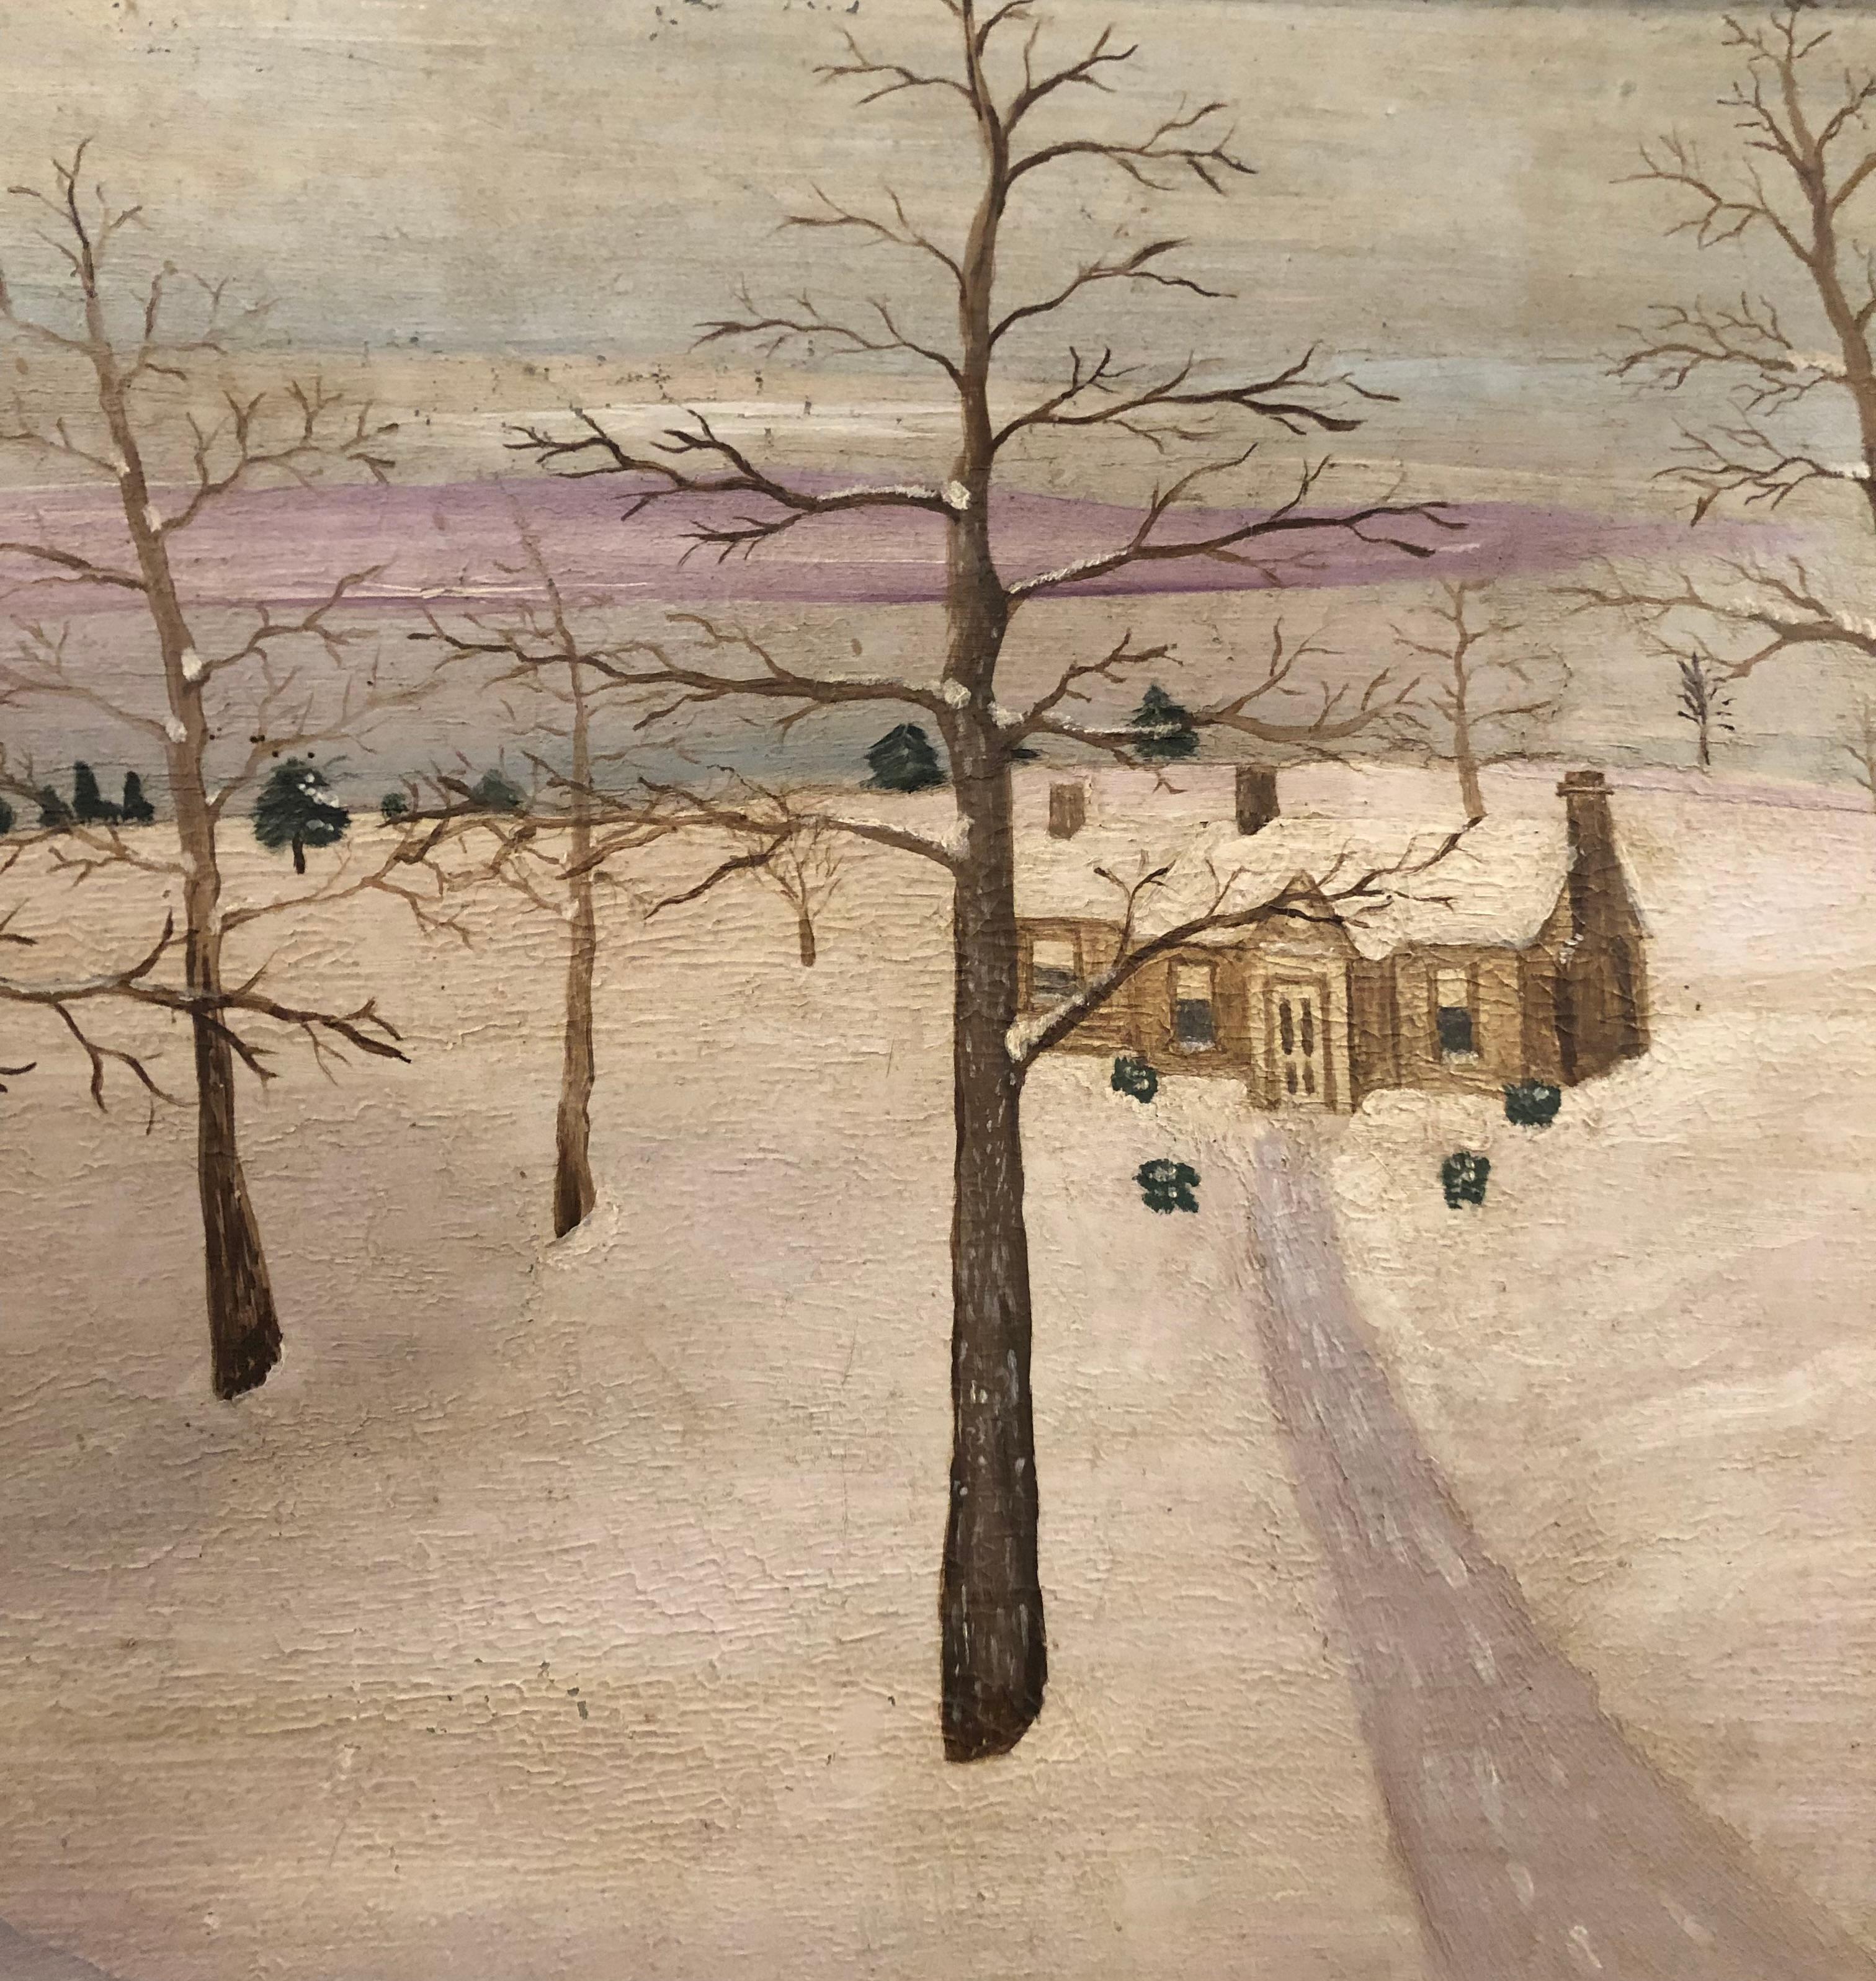 Painted Folk Art Painting of a Winter Landscape, American